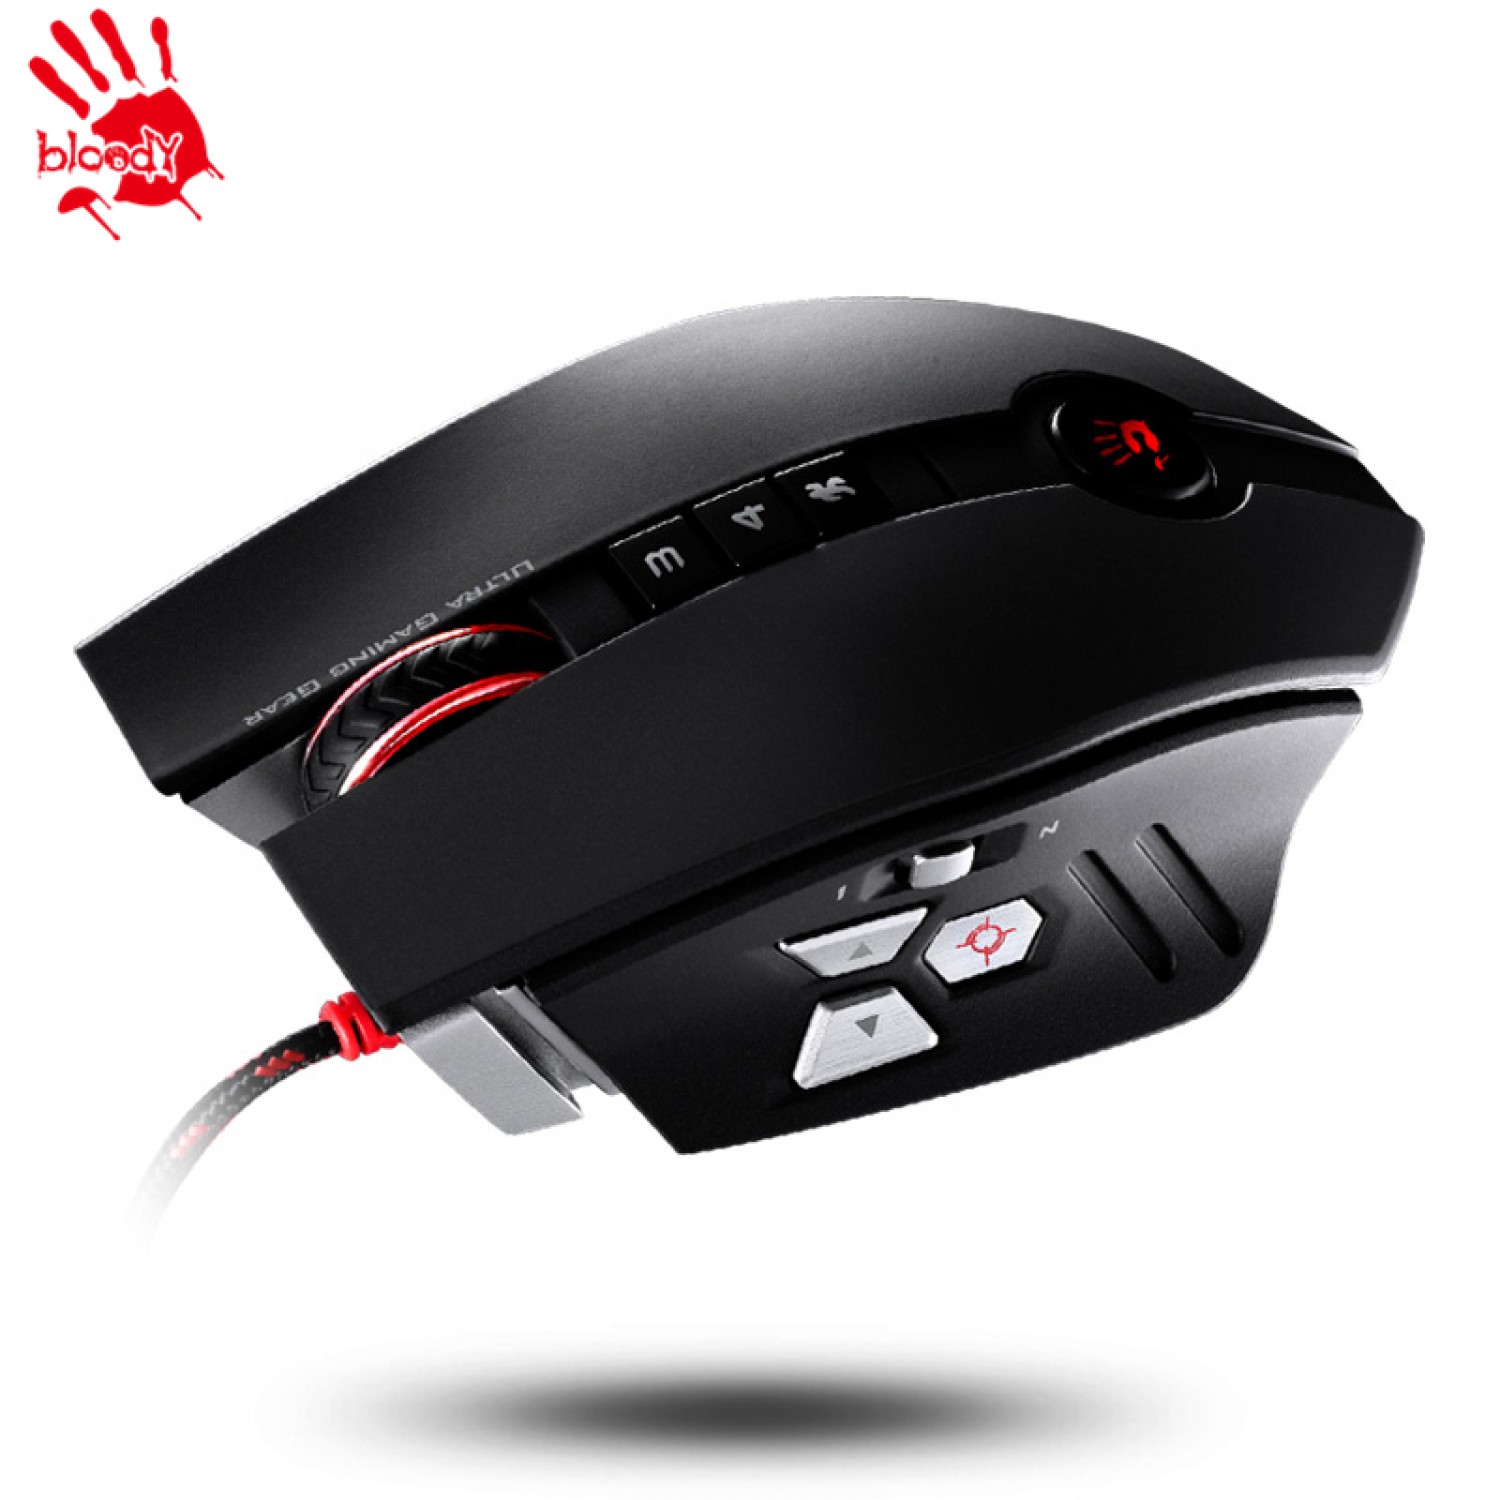  A4tech Bloody Zl50 Gaming Mouse